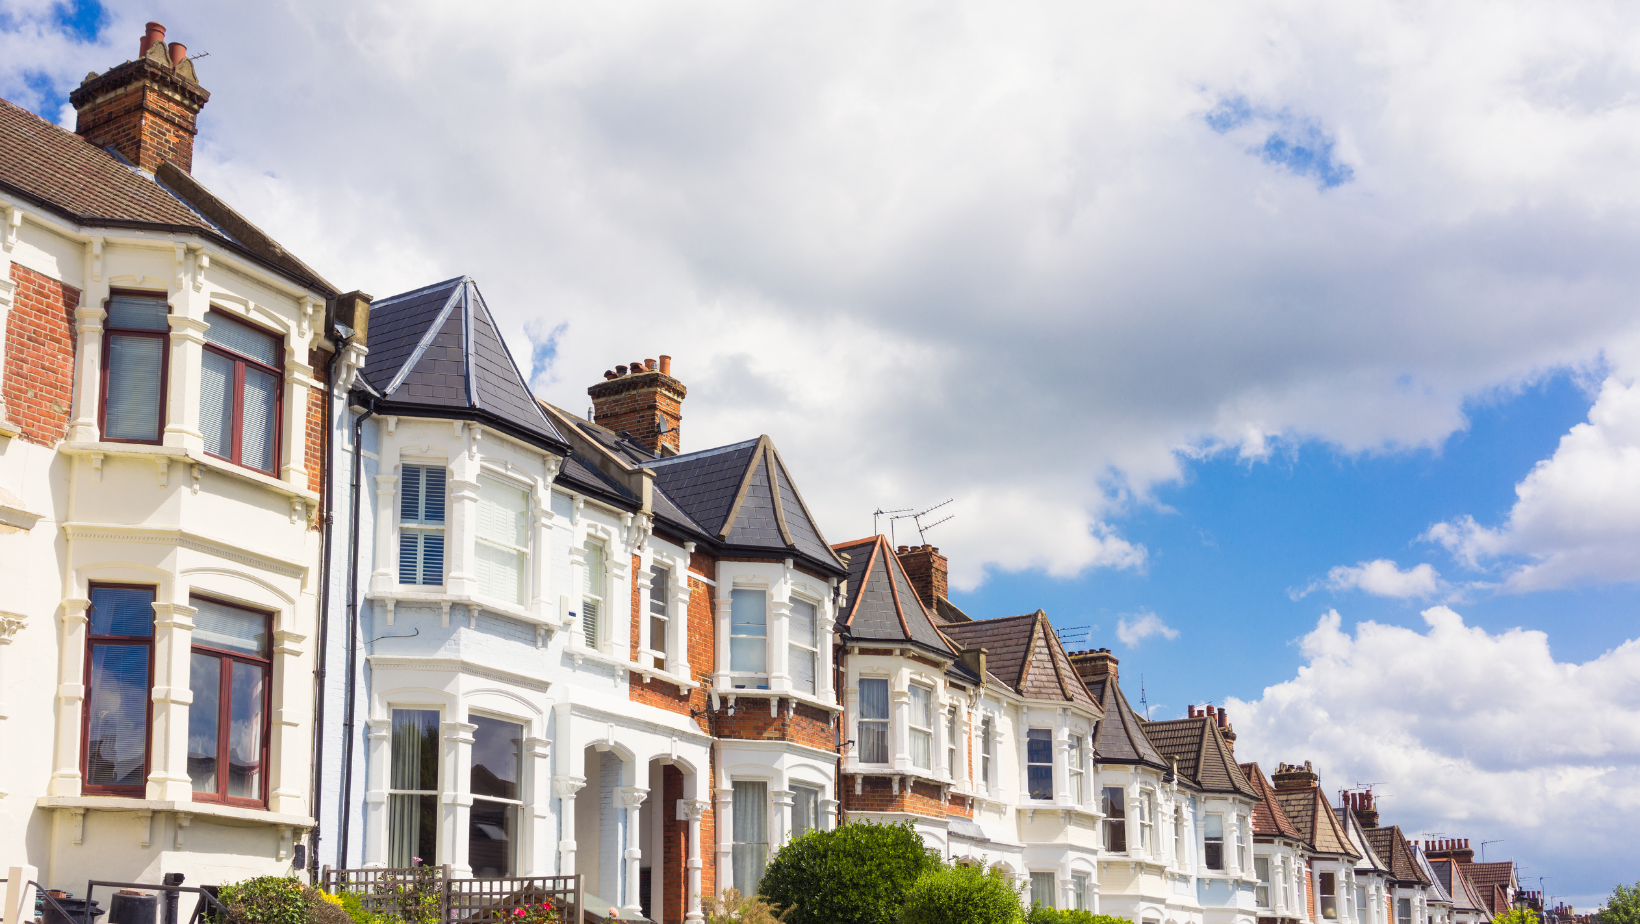 House Price Predictions For 2022 And What You Need To Know If You’re Considering A Move In The New Year.